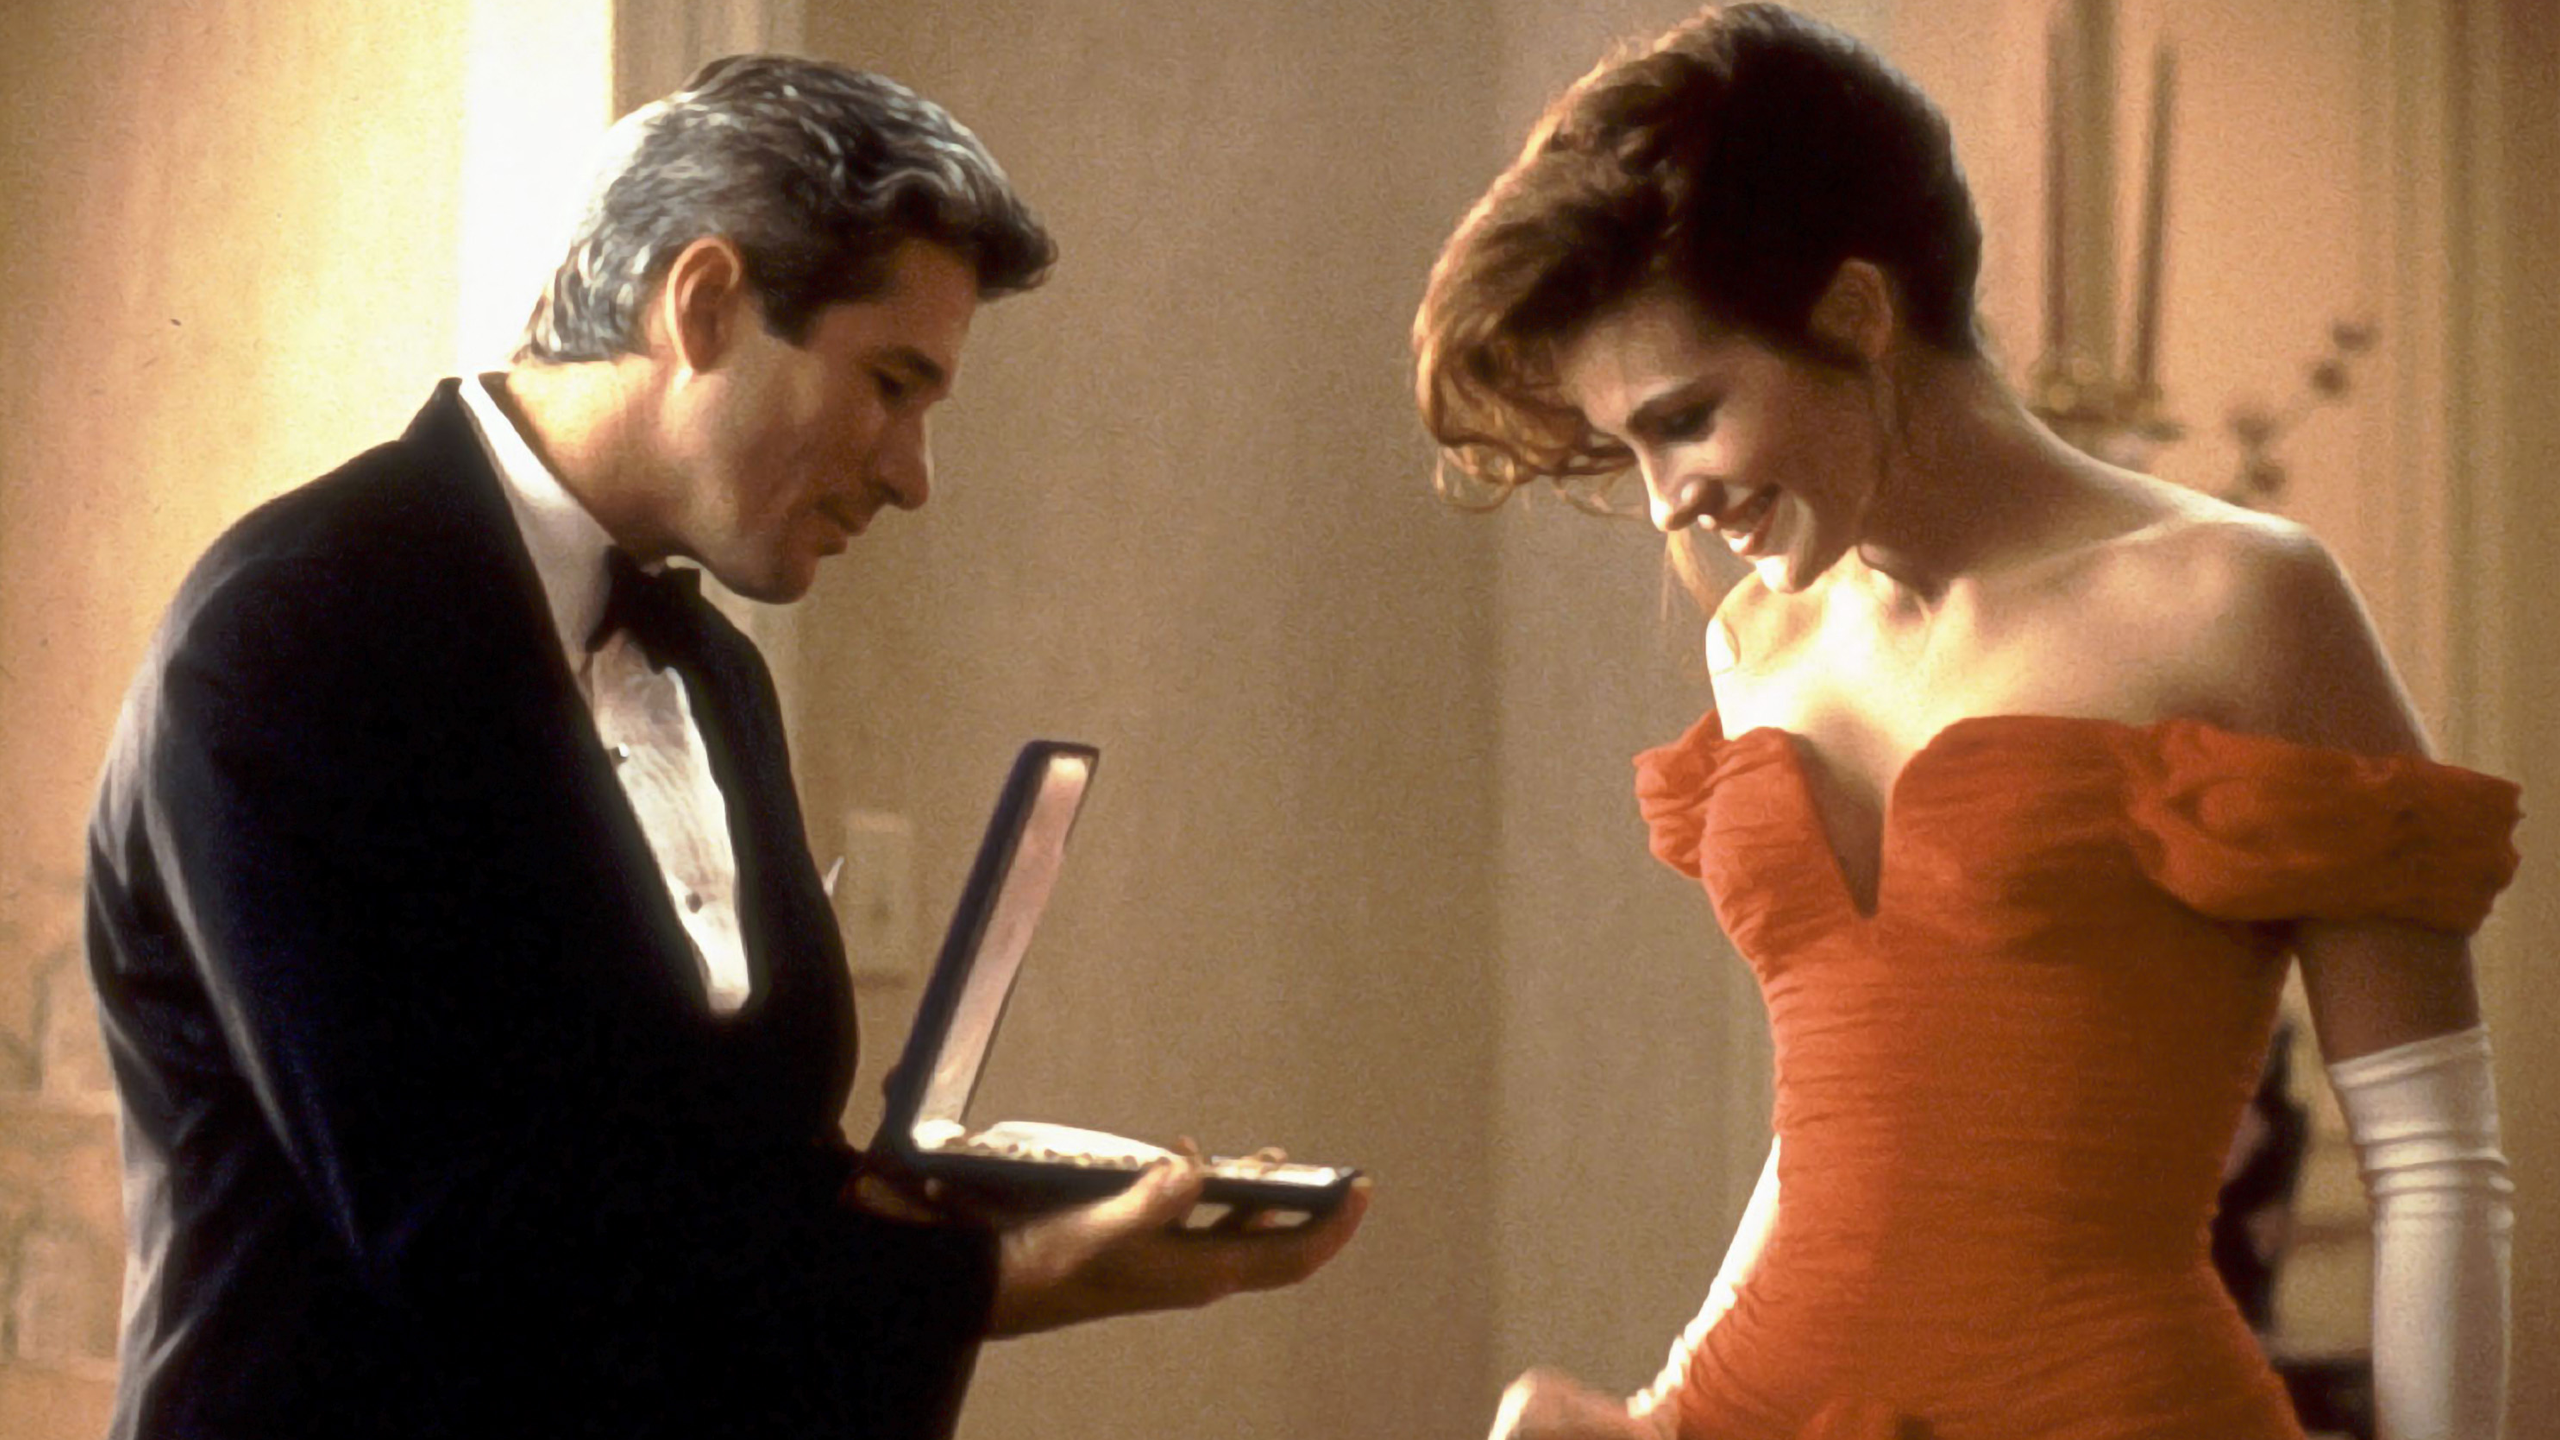 Pretty Woman Movie Wallpapers